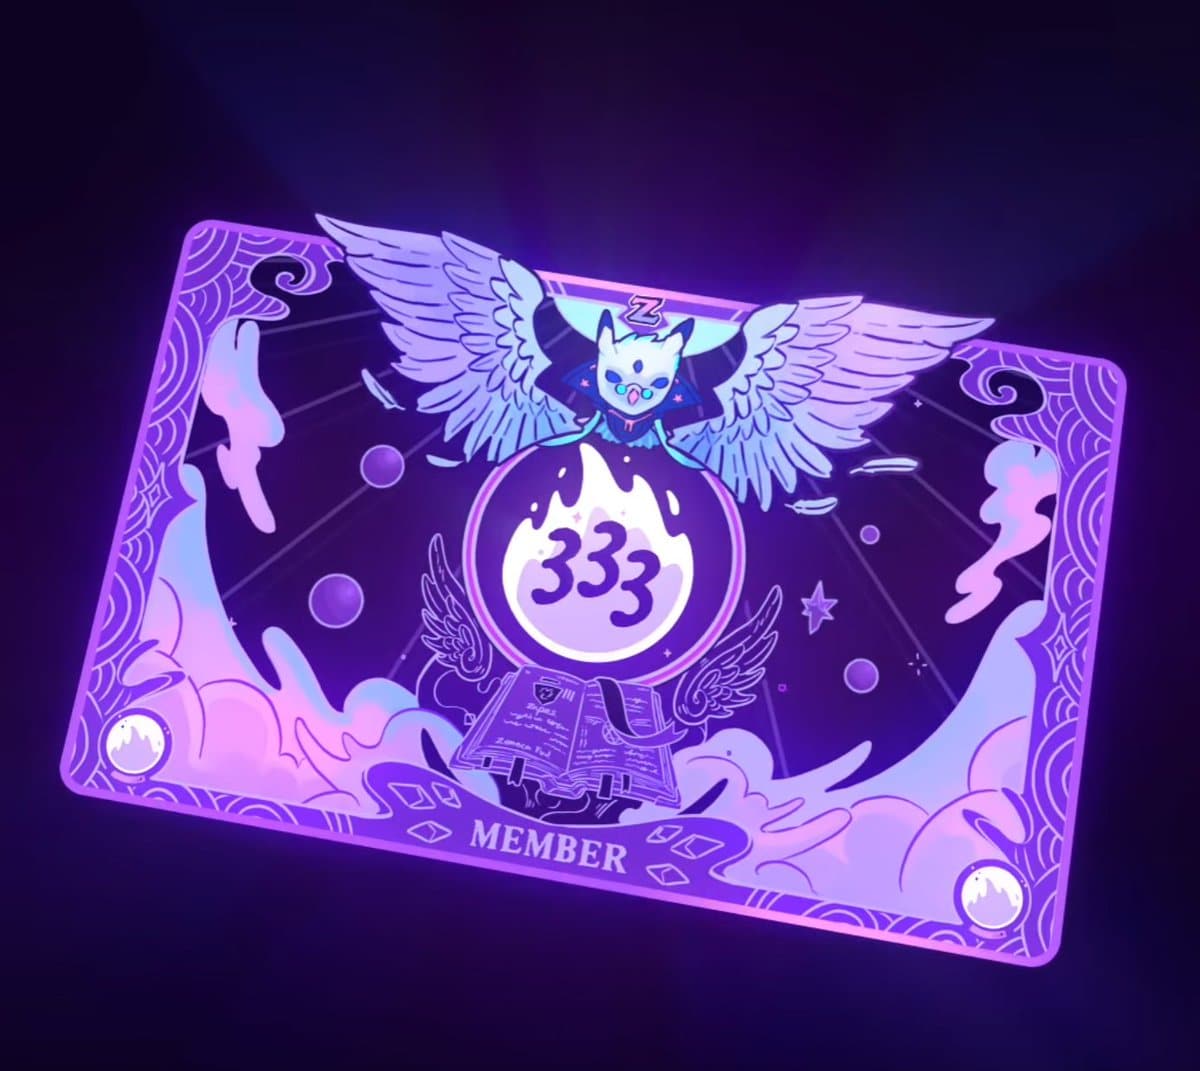 A bat is drawn on a purple card in support of ZenAcademy ZenChests Summoning.